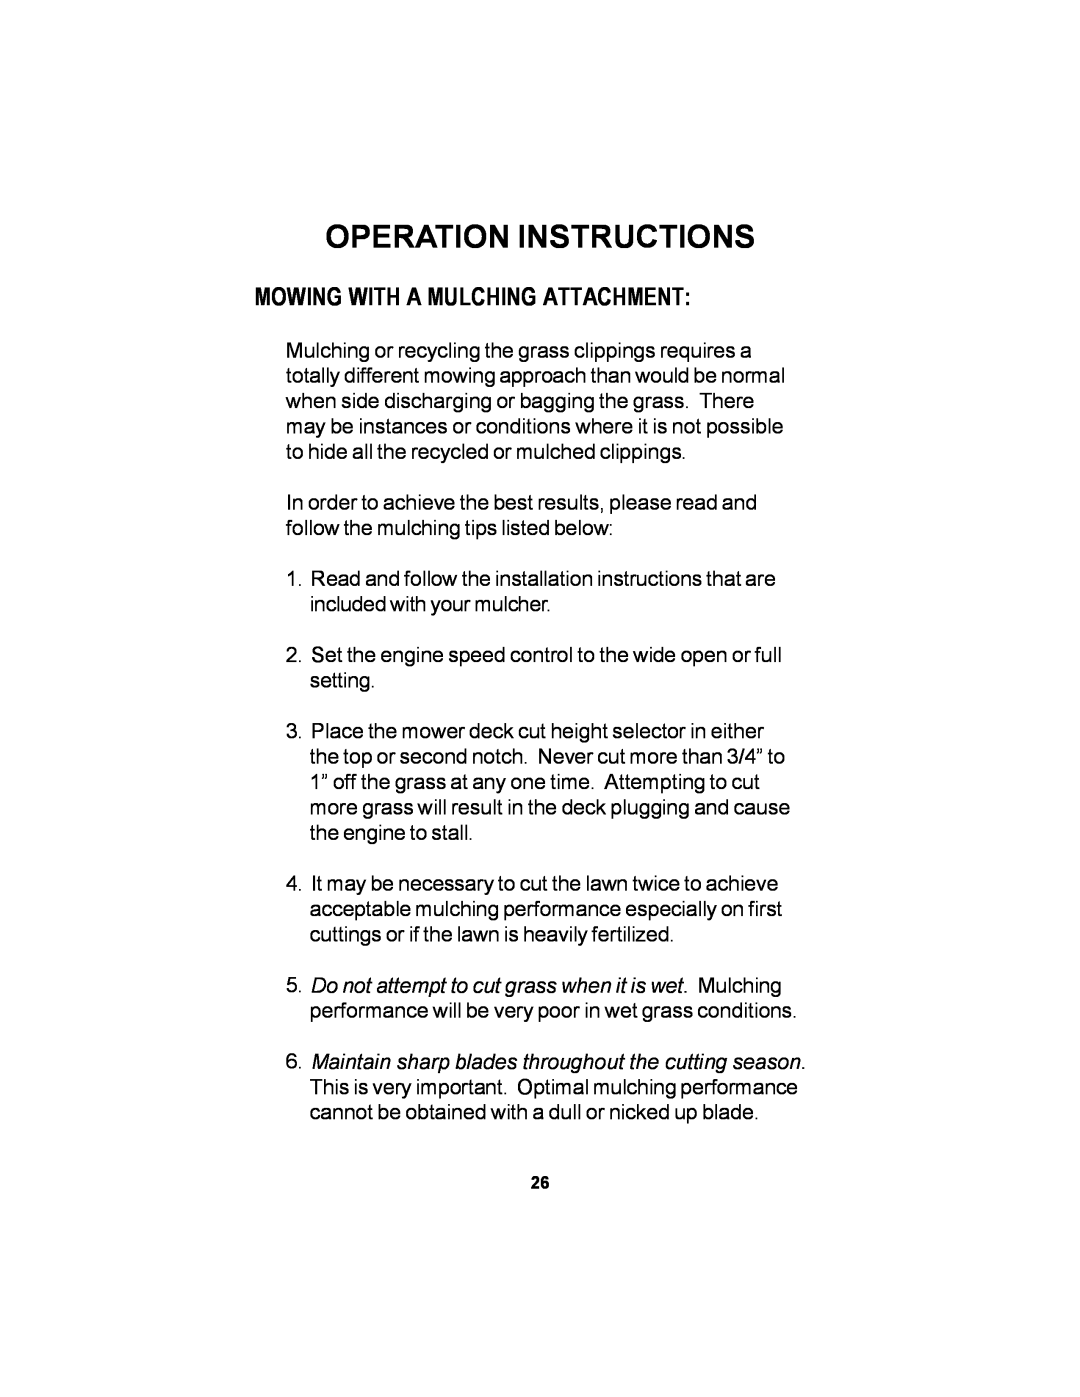 Dixon 14295-1005 manual Mowing With A Mulching Attachment, Operation Instructions 